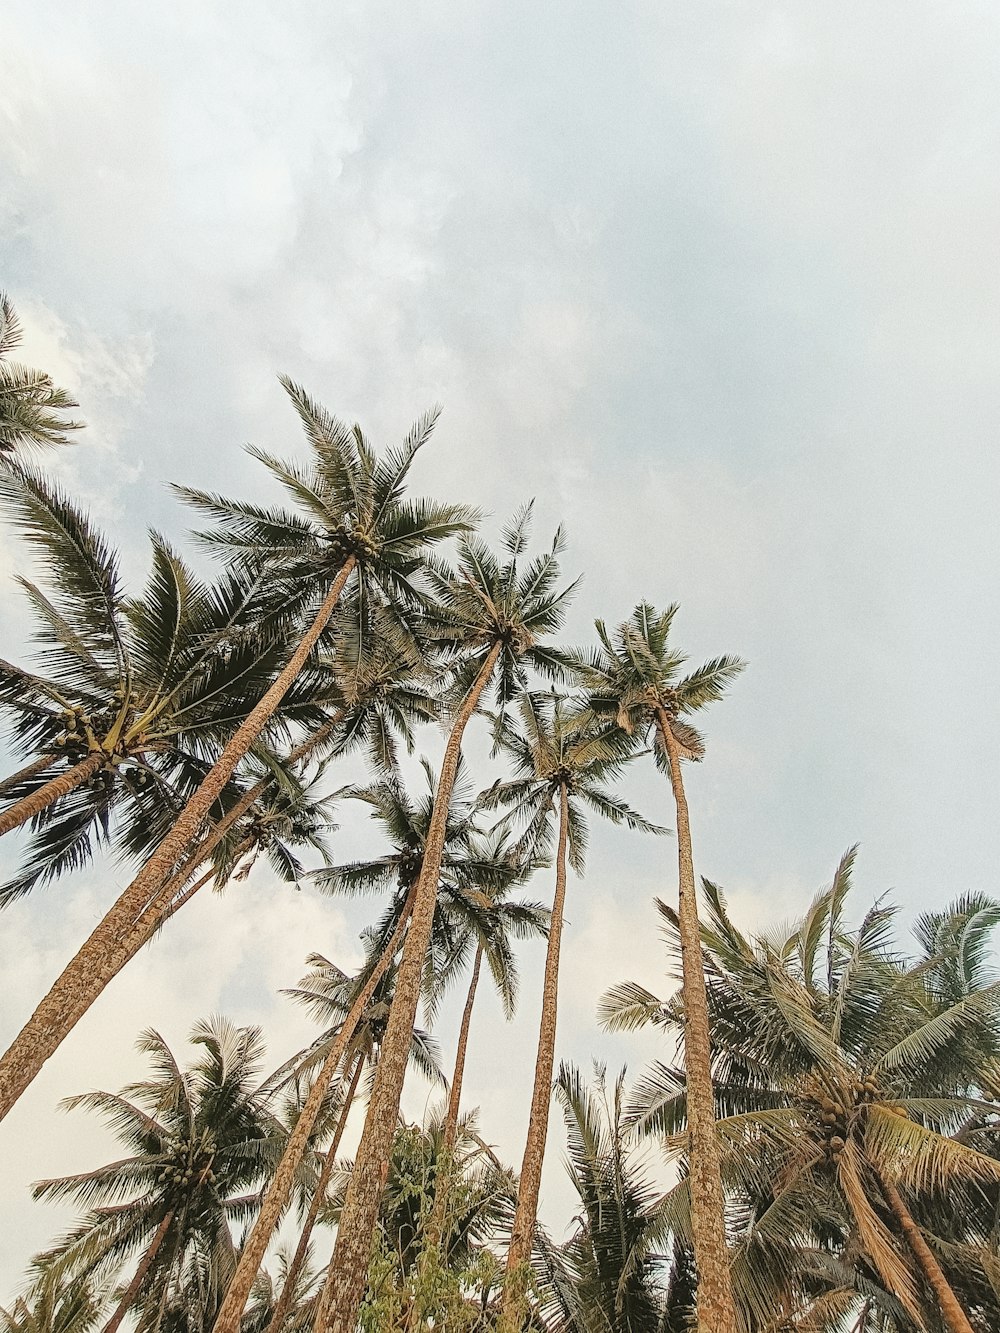 a group of palm trees with a cloudy sky in the background